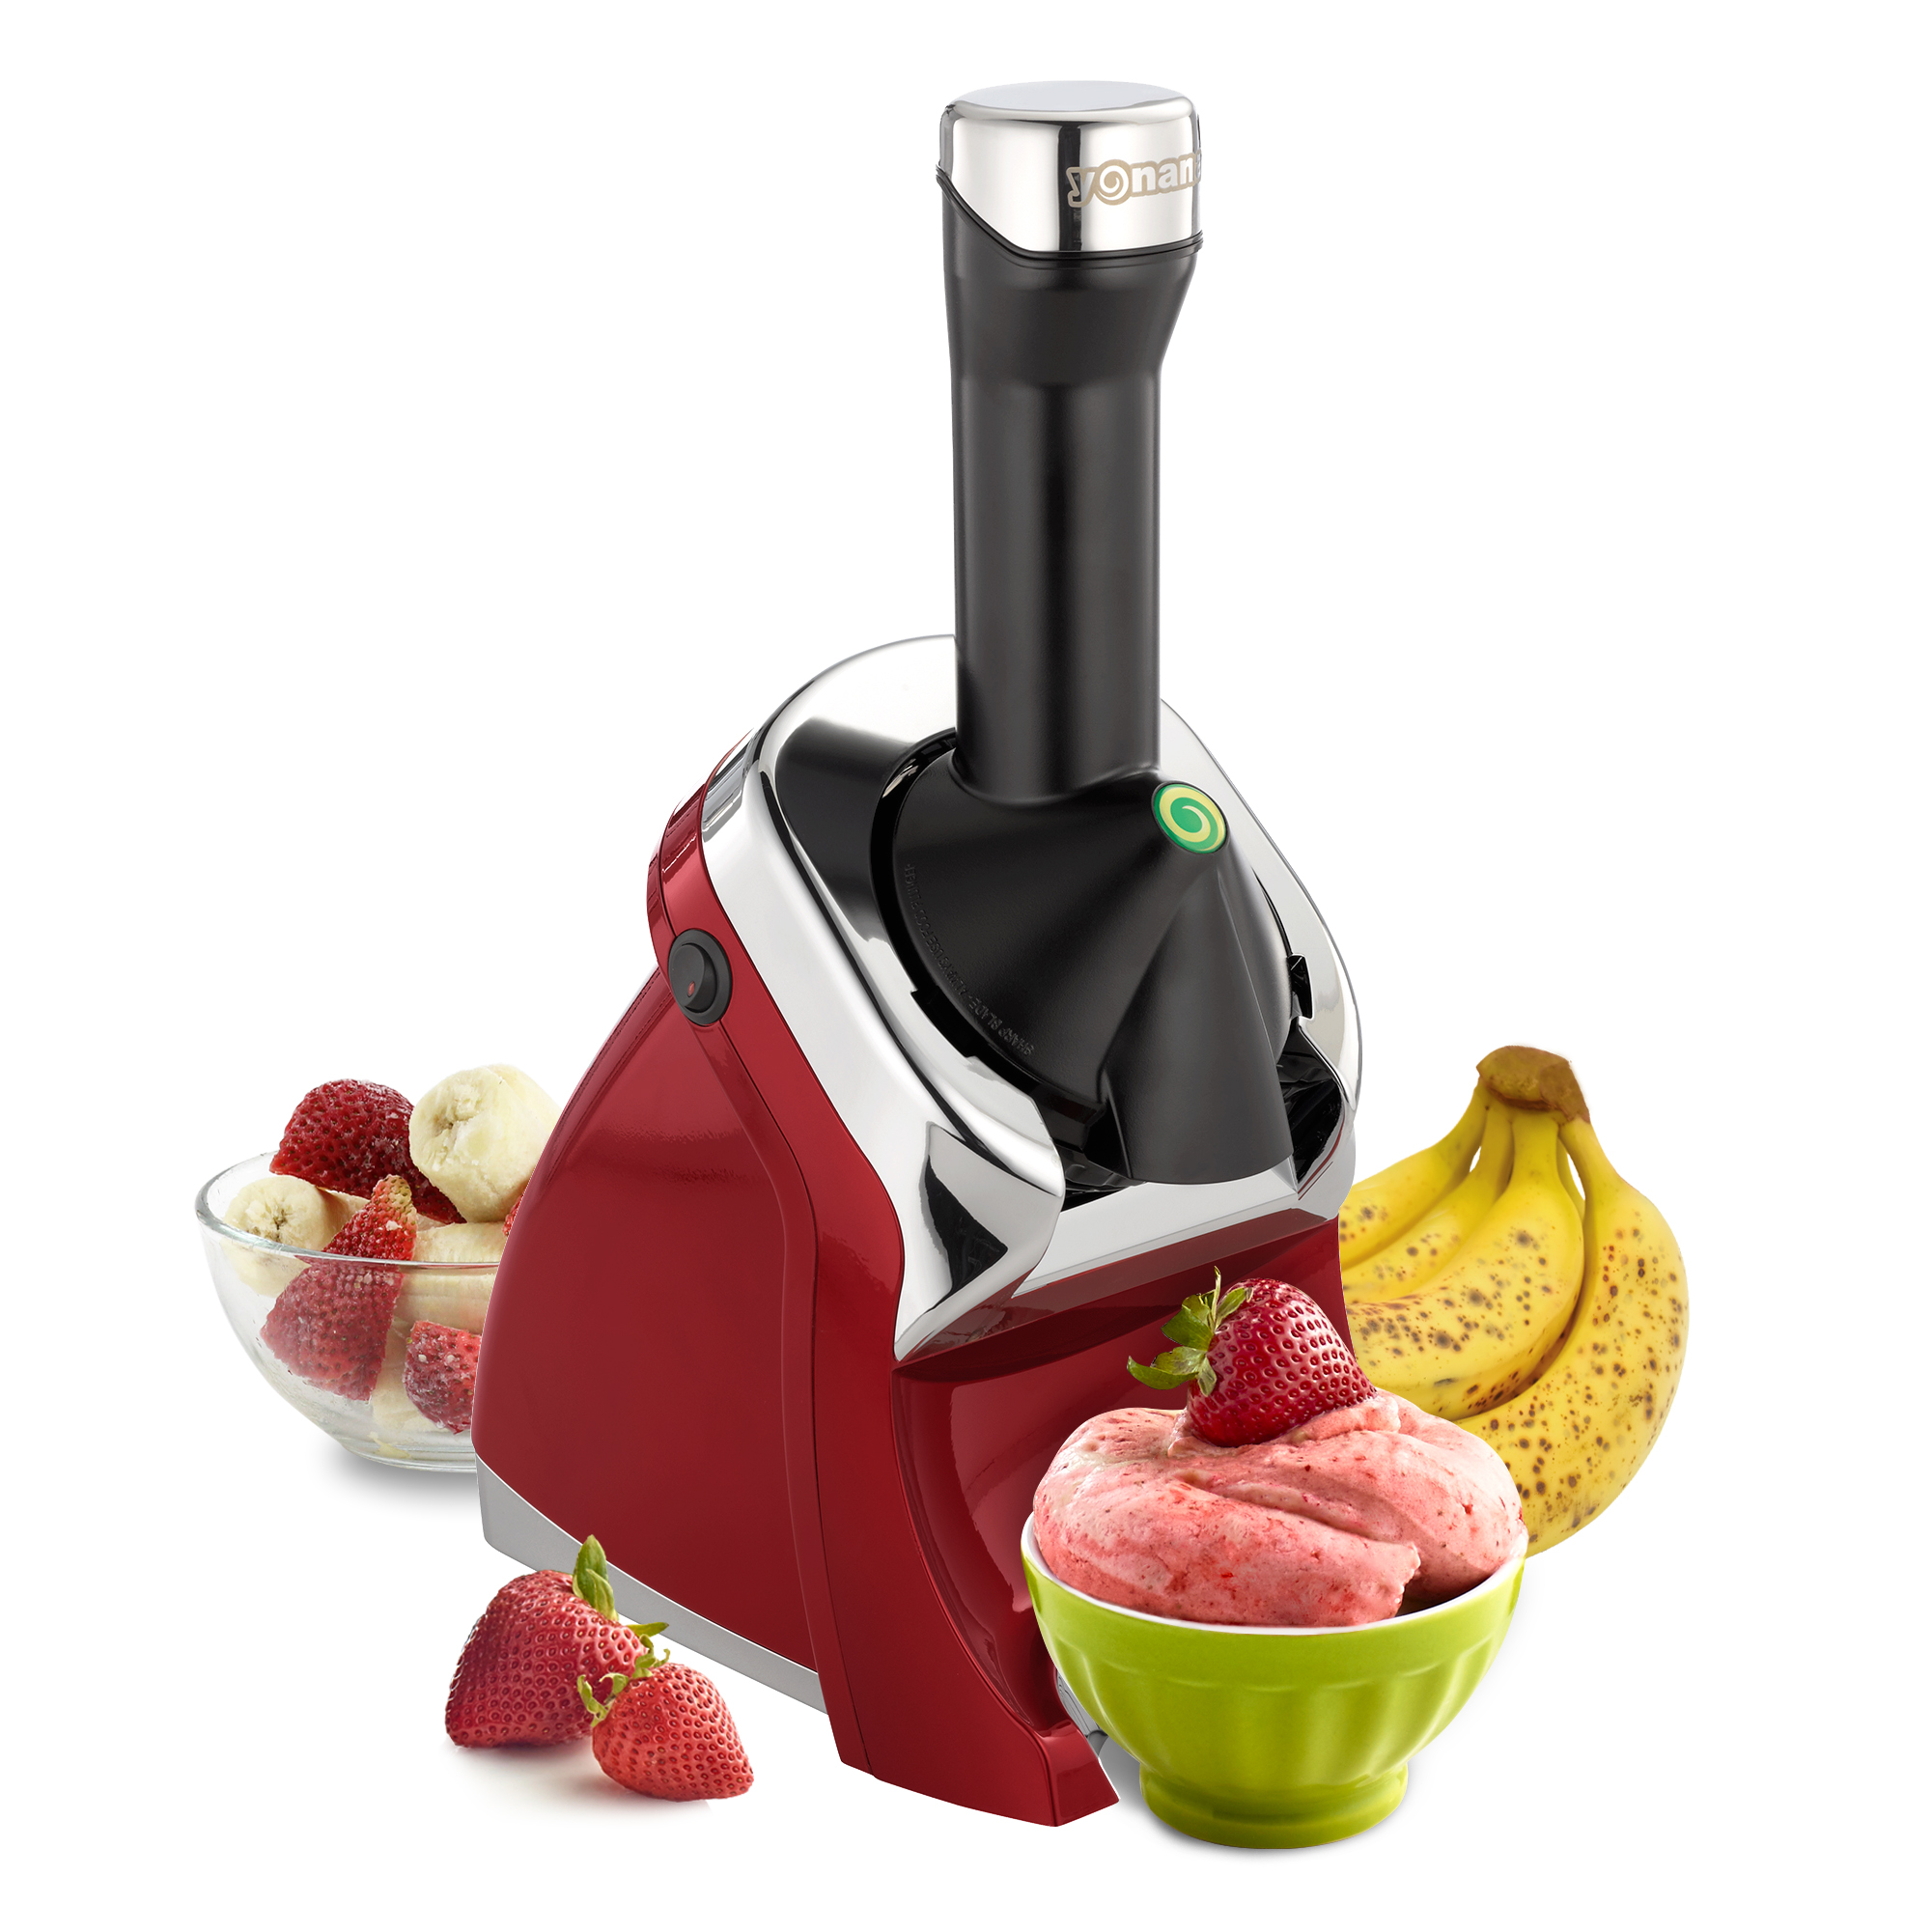 Yonanas Deluxe Red Non-Dairy Frozen Fruit Soft Serve Dessert Maker, Includes 75 Recipes, 200 Watts - image 1 of 10